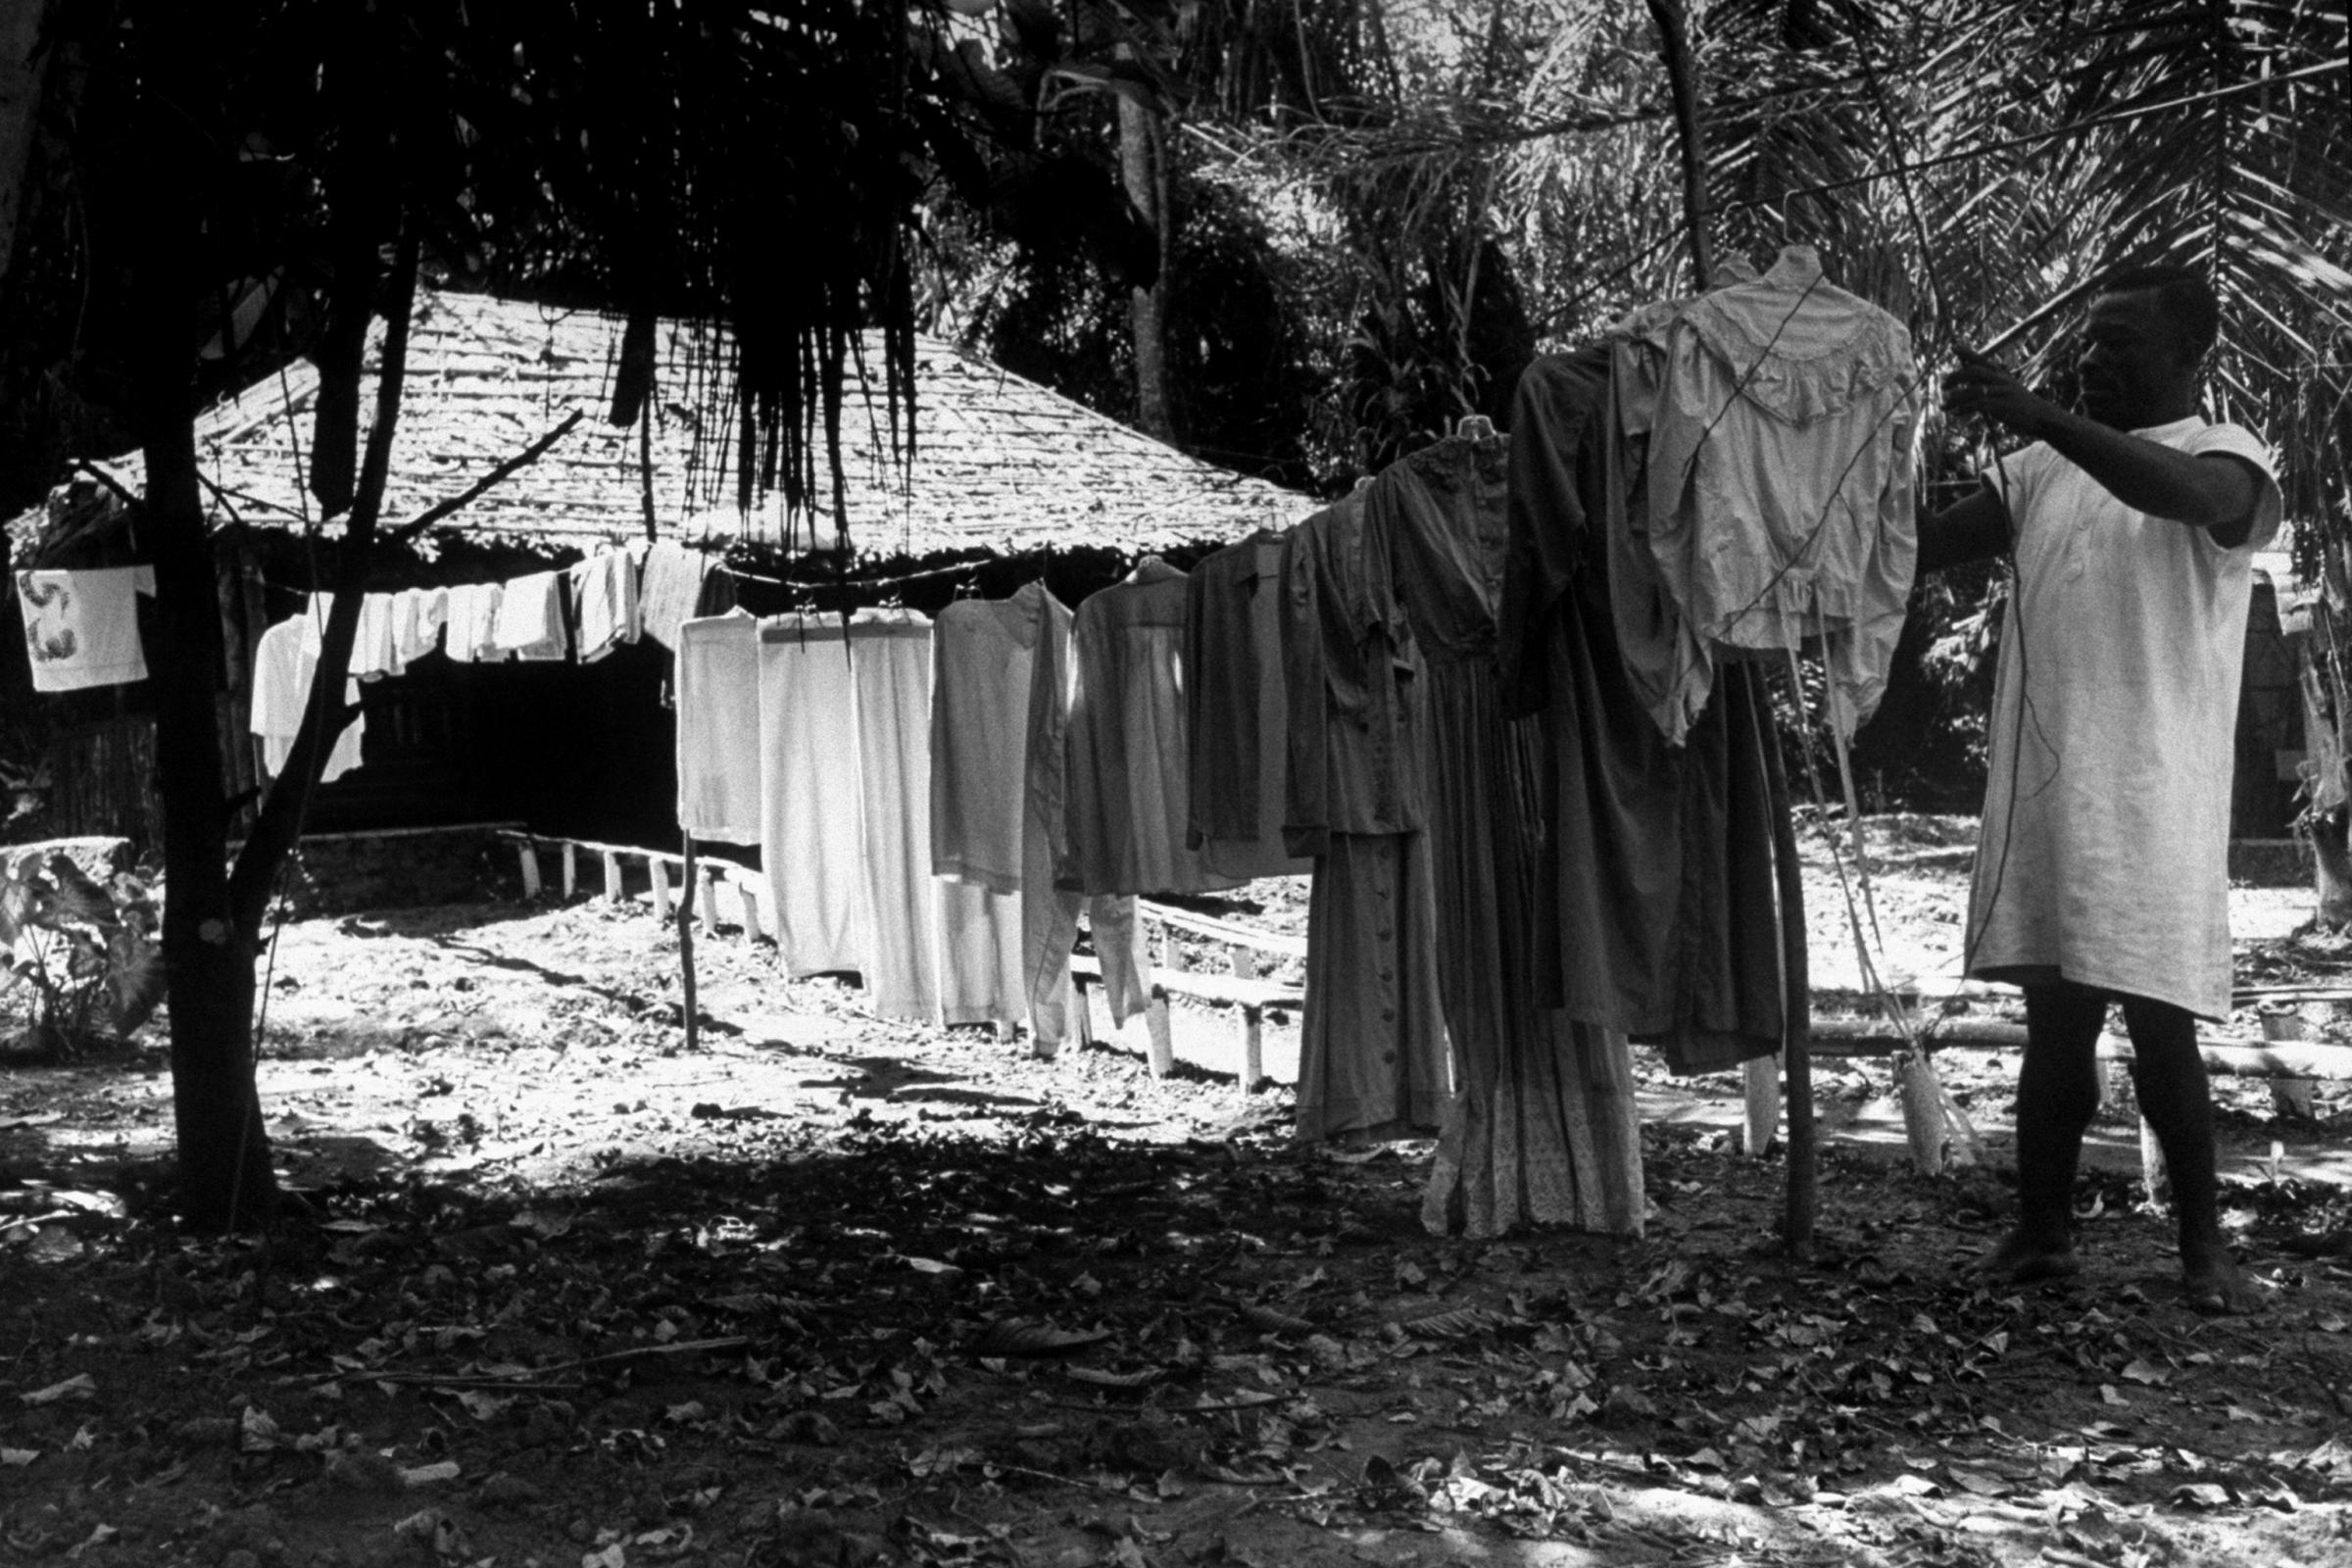 A local resident tends to the wardrobe for Katharine Hepburn on location for The African Queen.